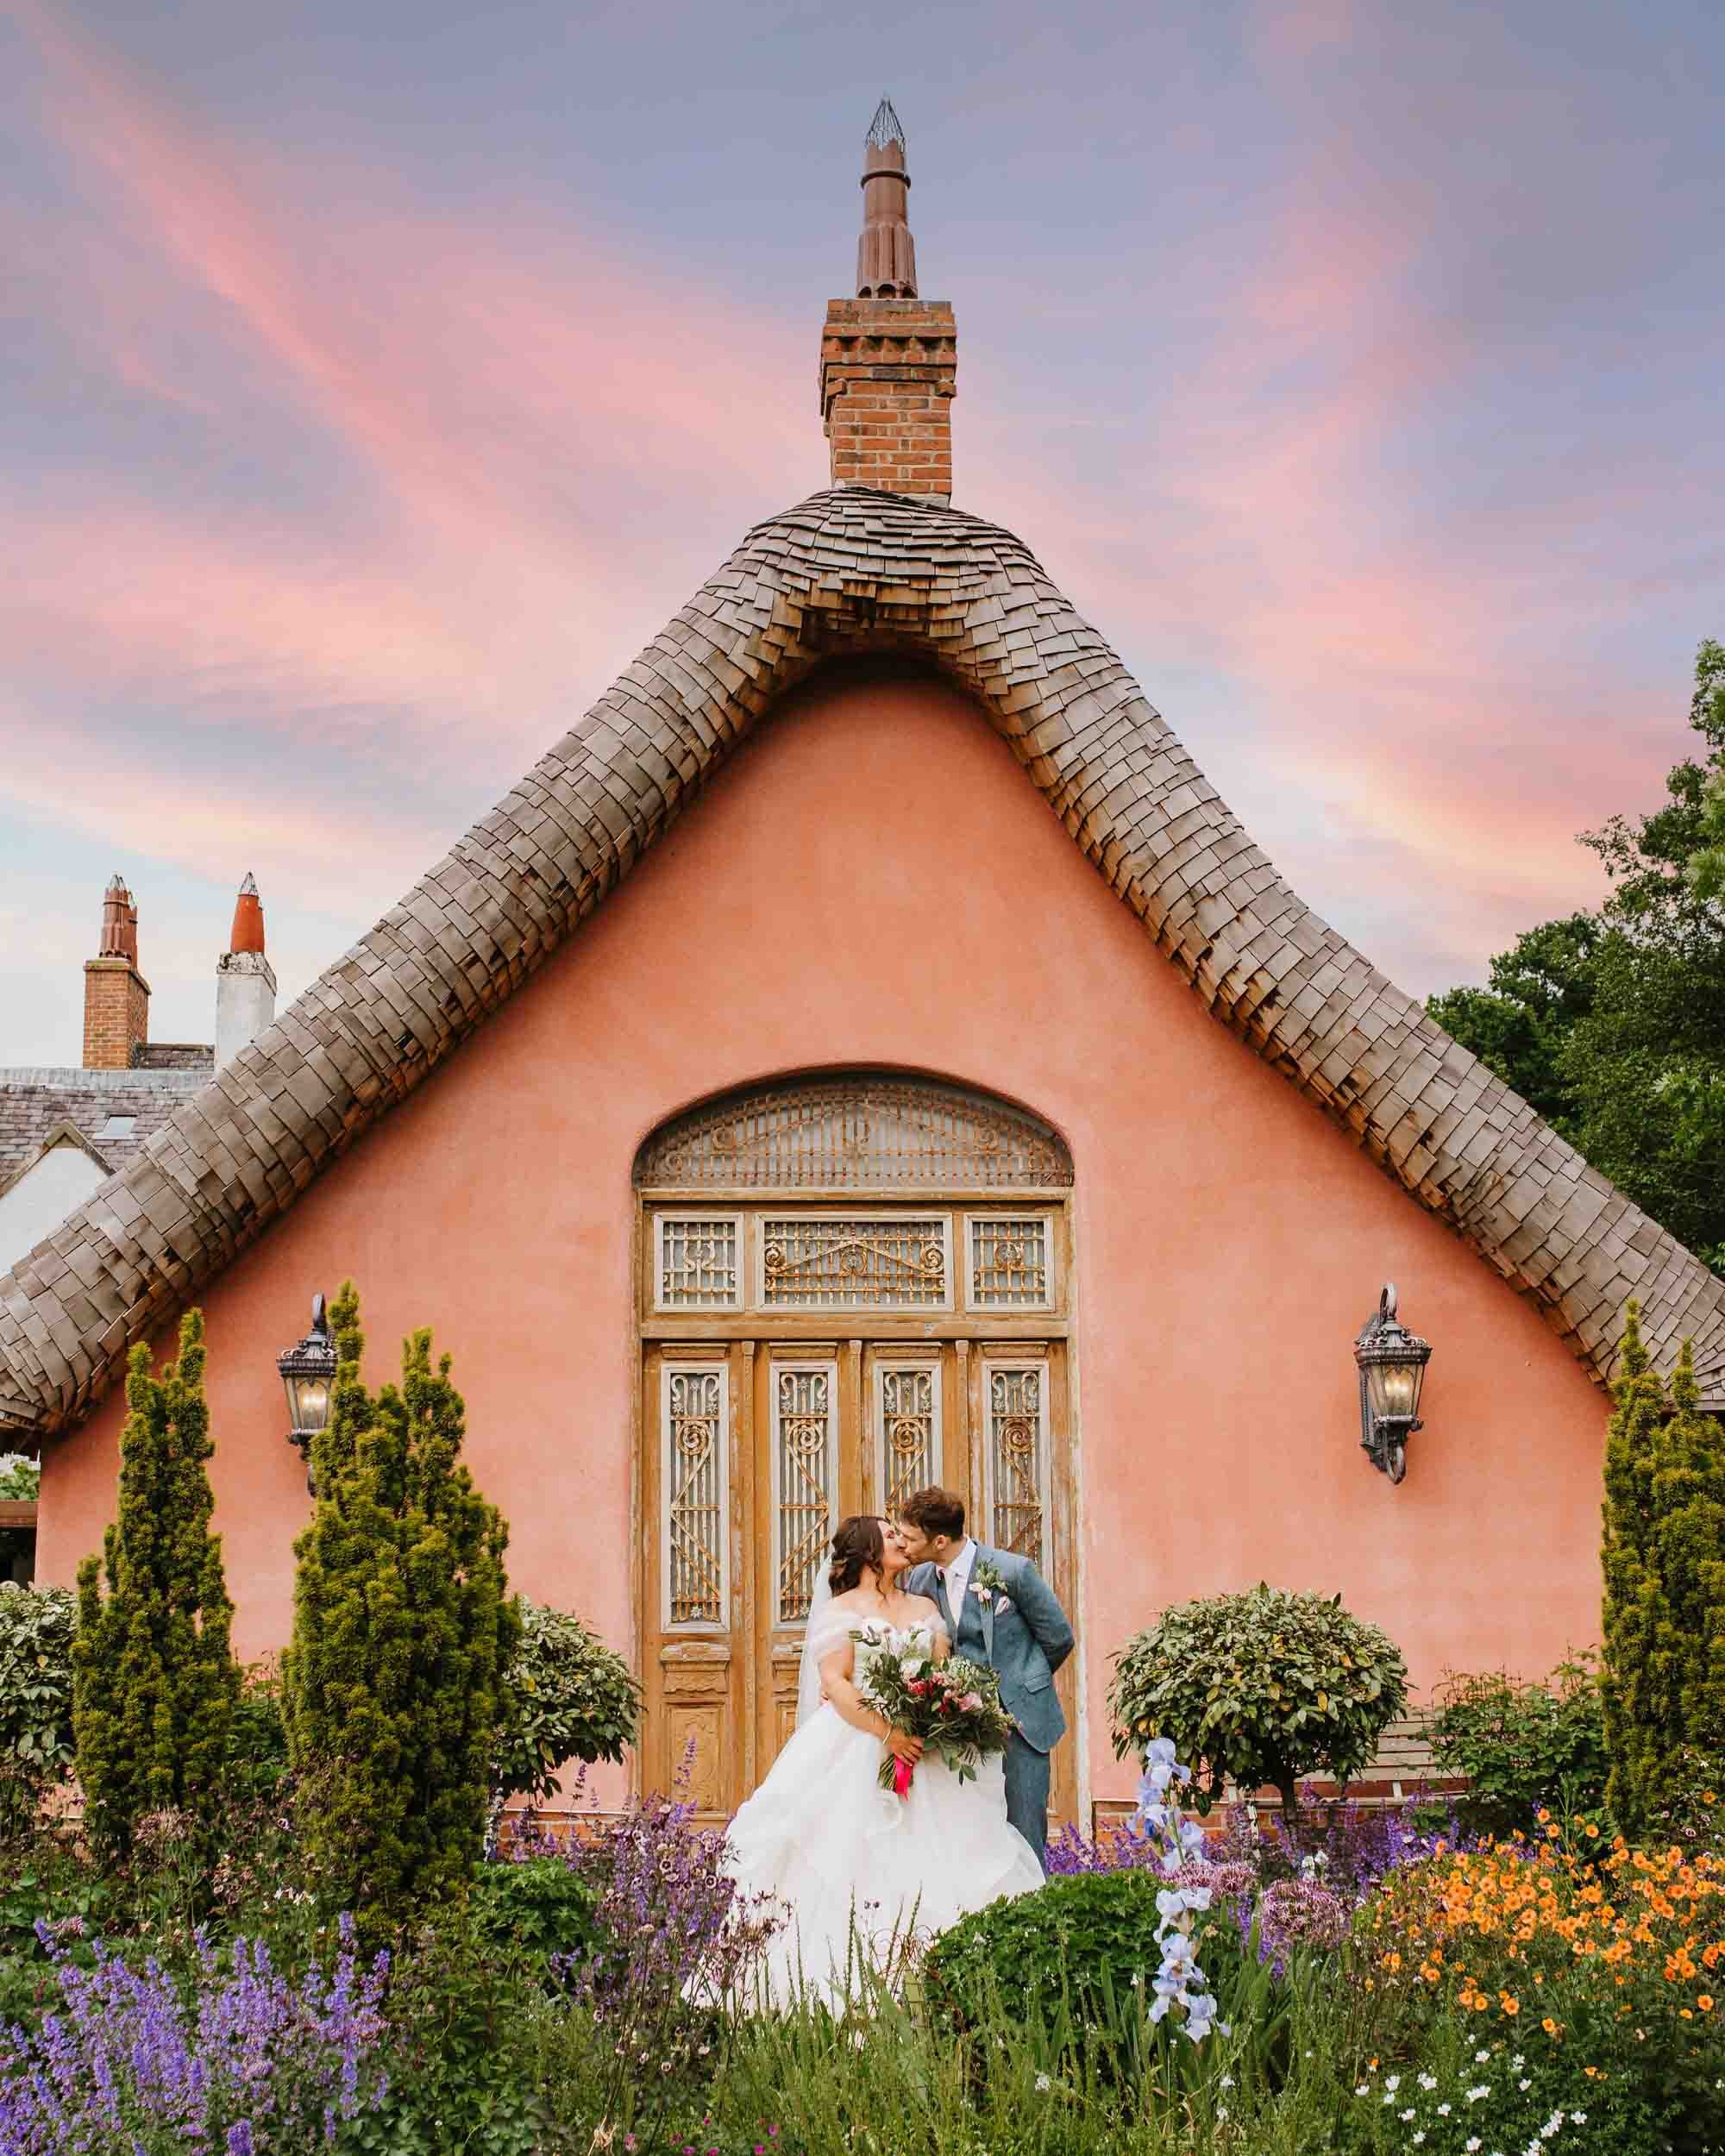 Le Petit Chateau at night, pink and purple sky with bride and groom (Copy)